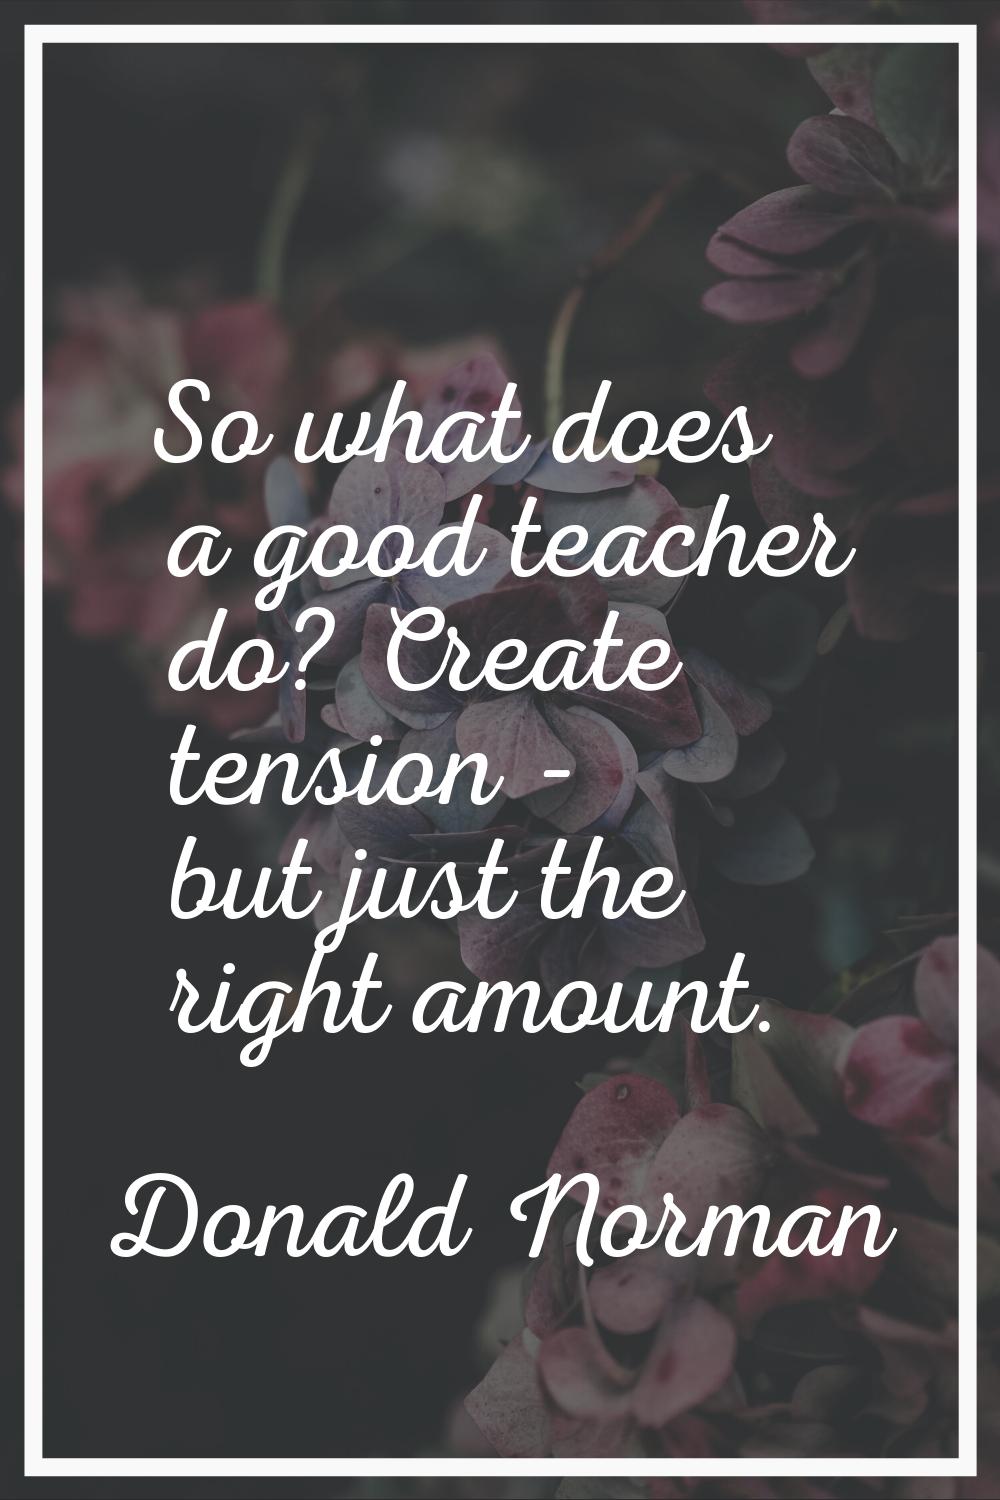 So what does a good teacher do? Create tension - but just the right amount.